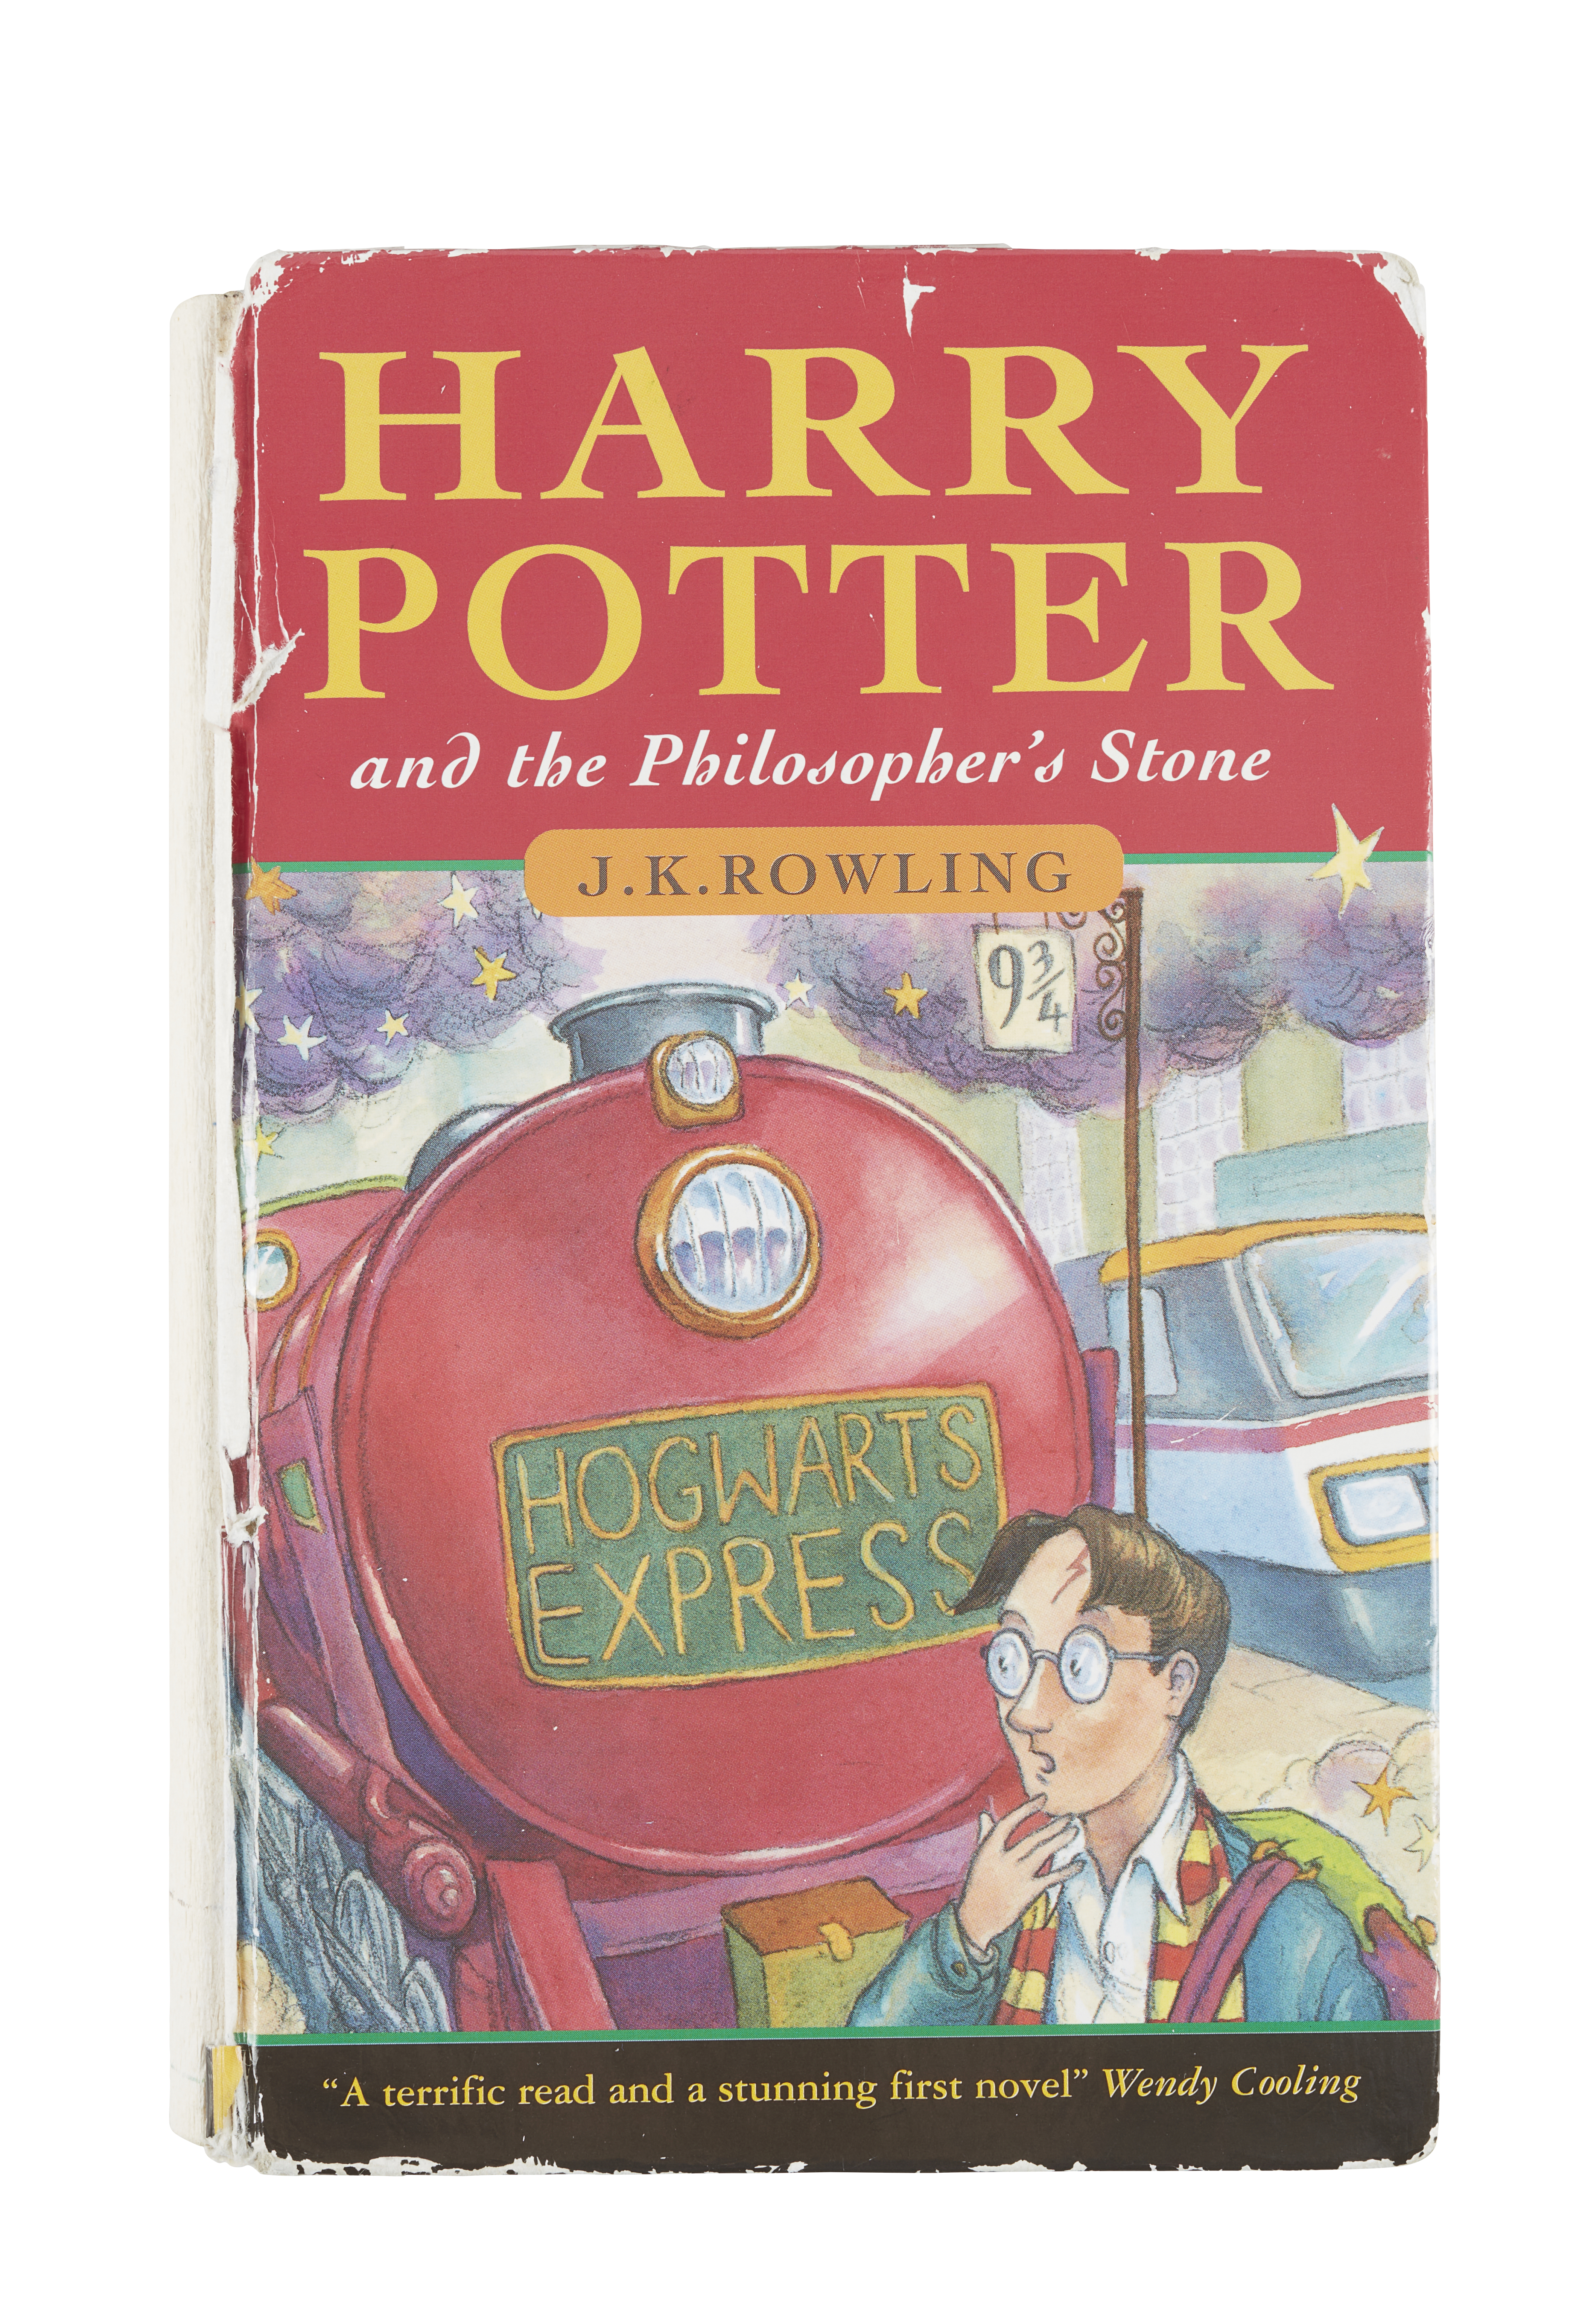 First edition of Harry Potter